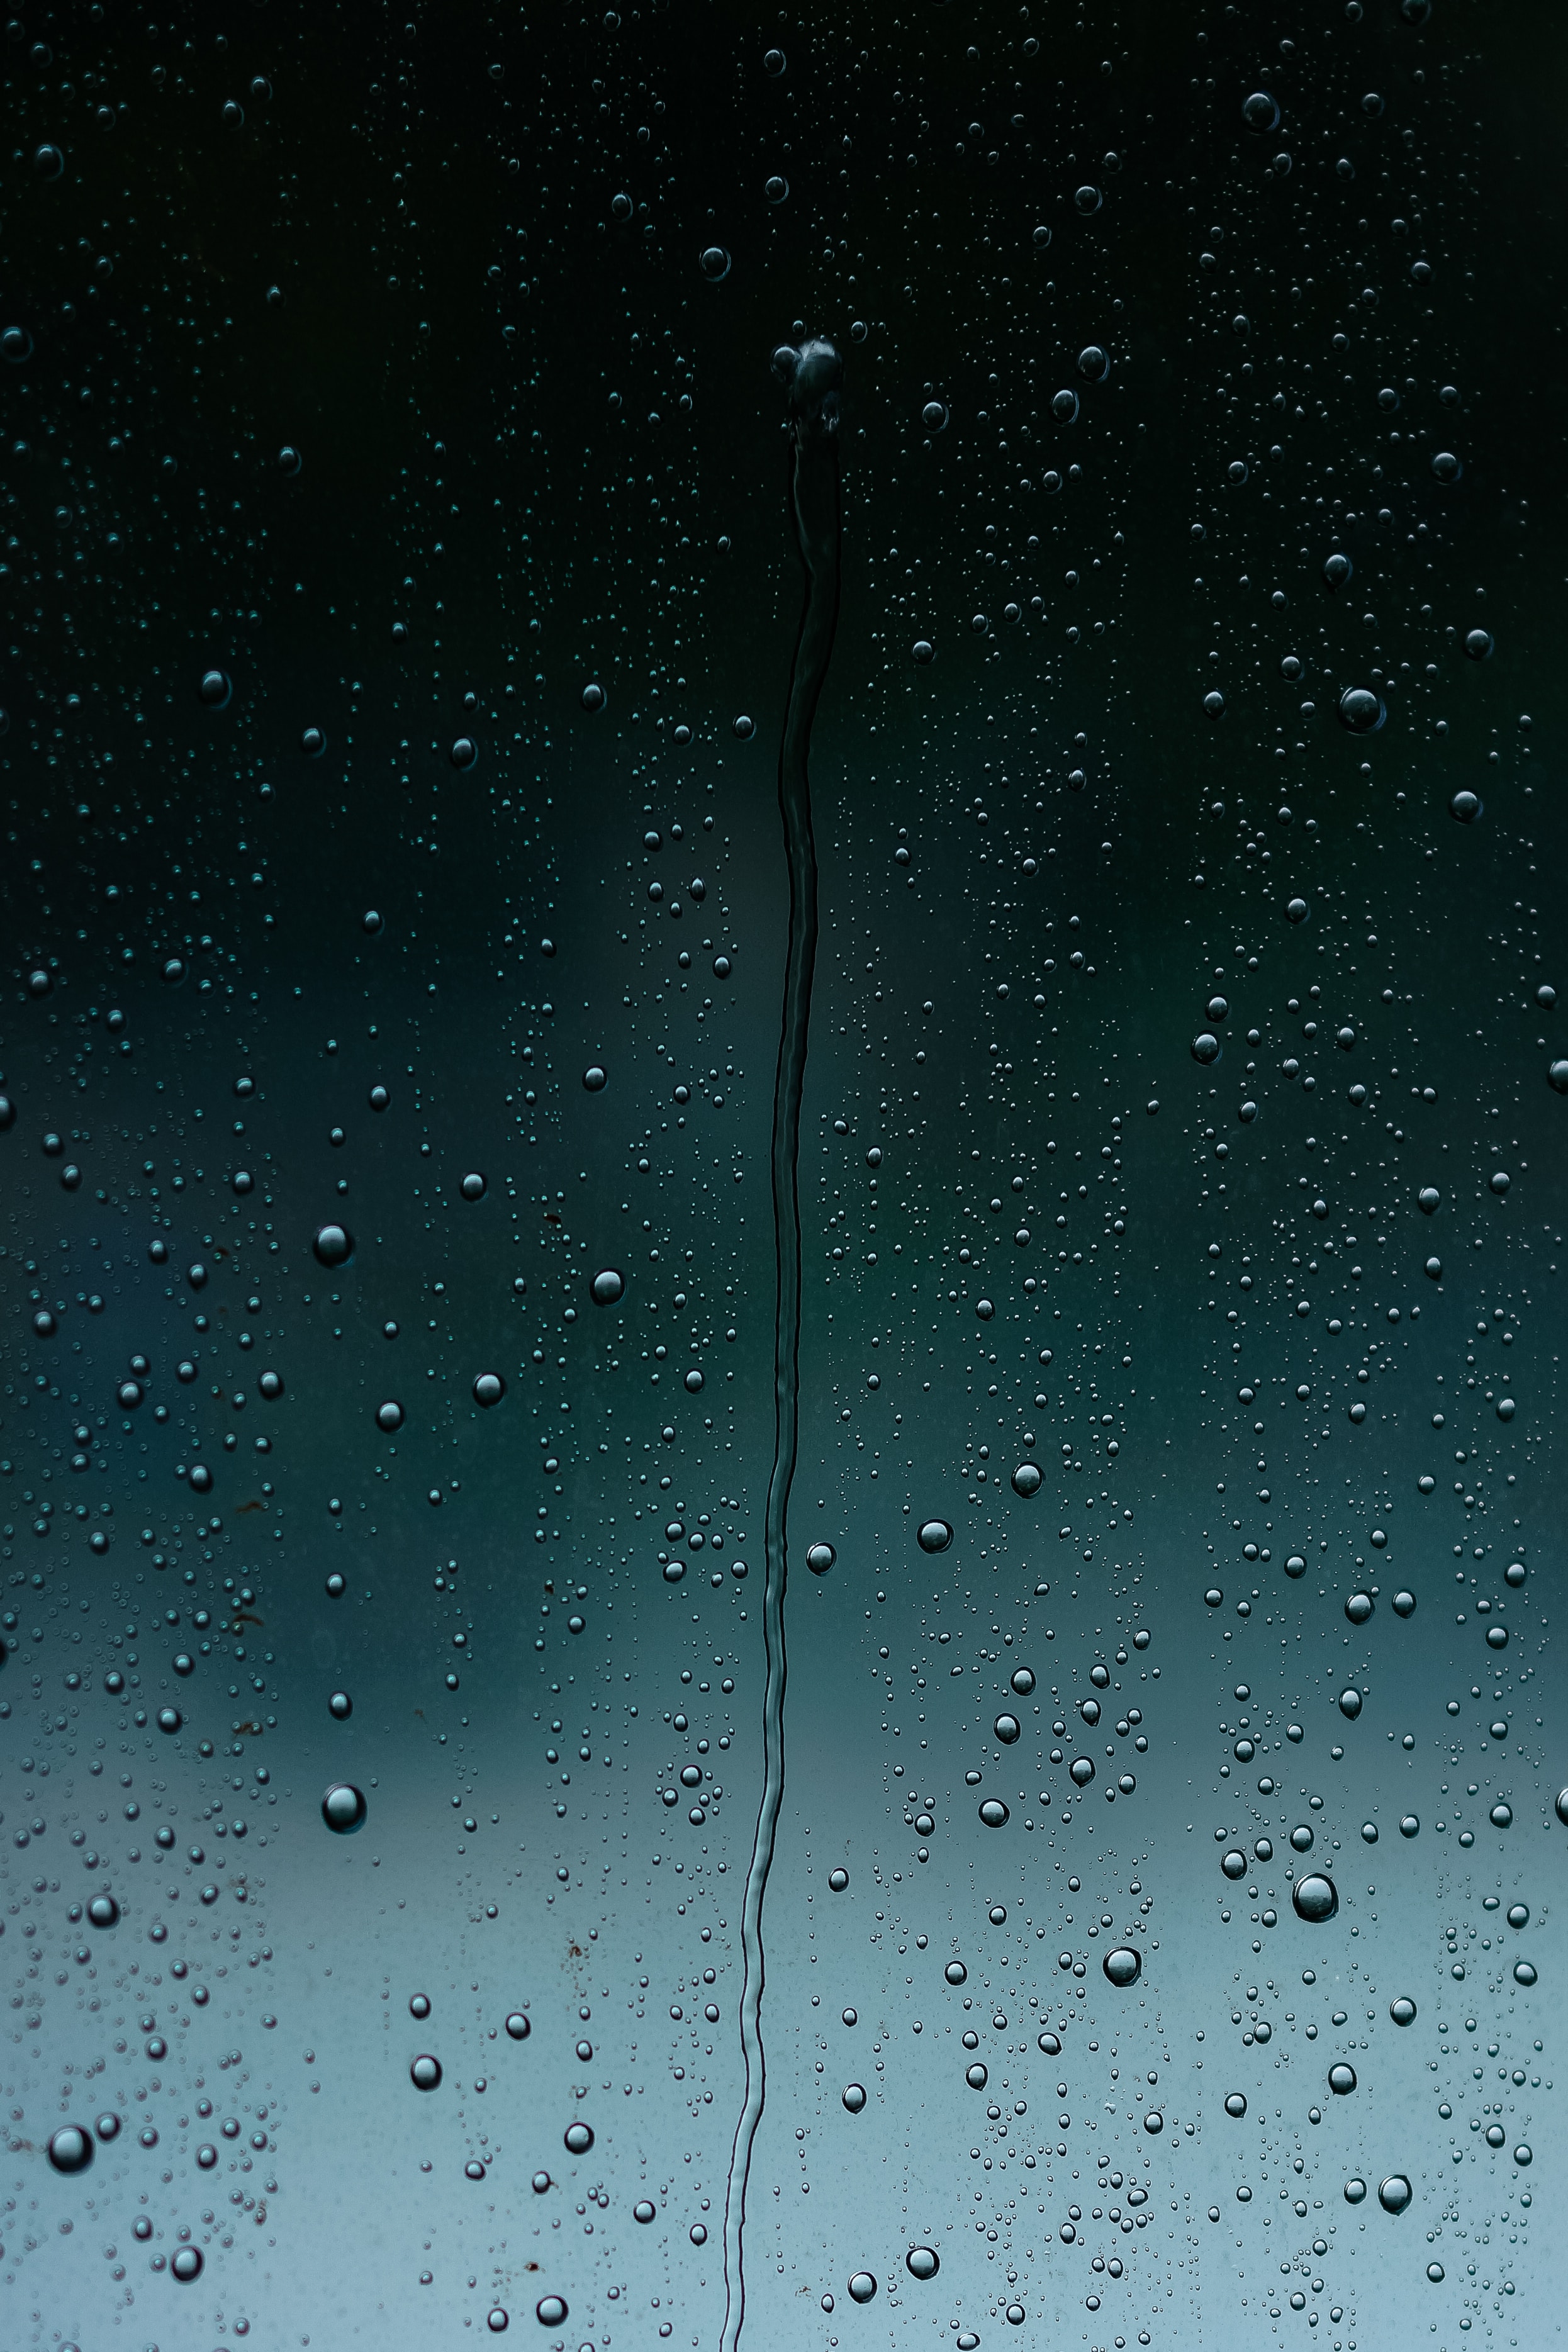 54481 free wallpaper 240x320 for phone, download images glass, wet, drops, surface 240x320 for mobile